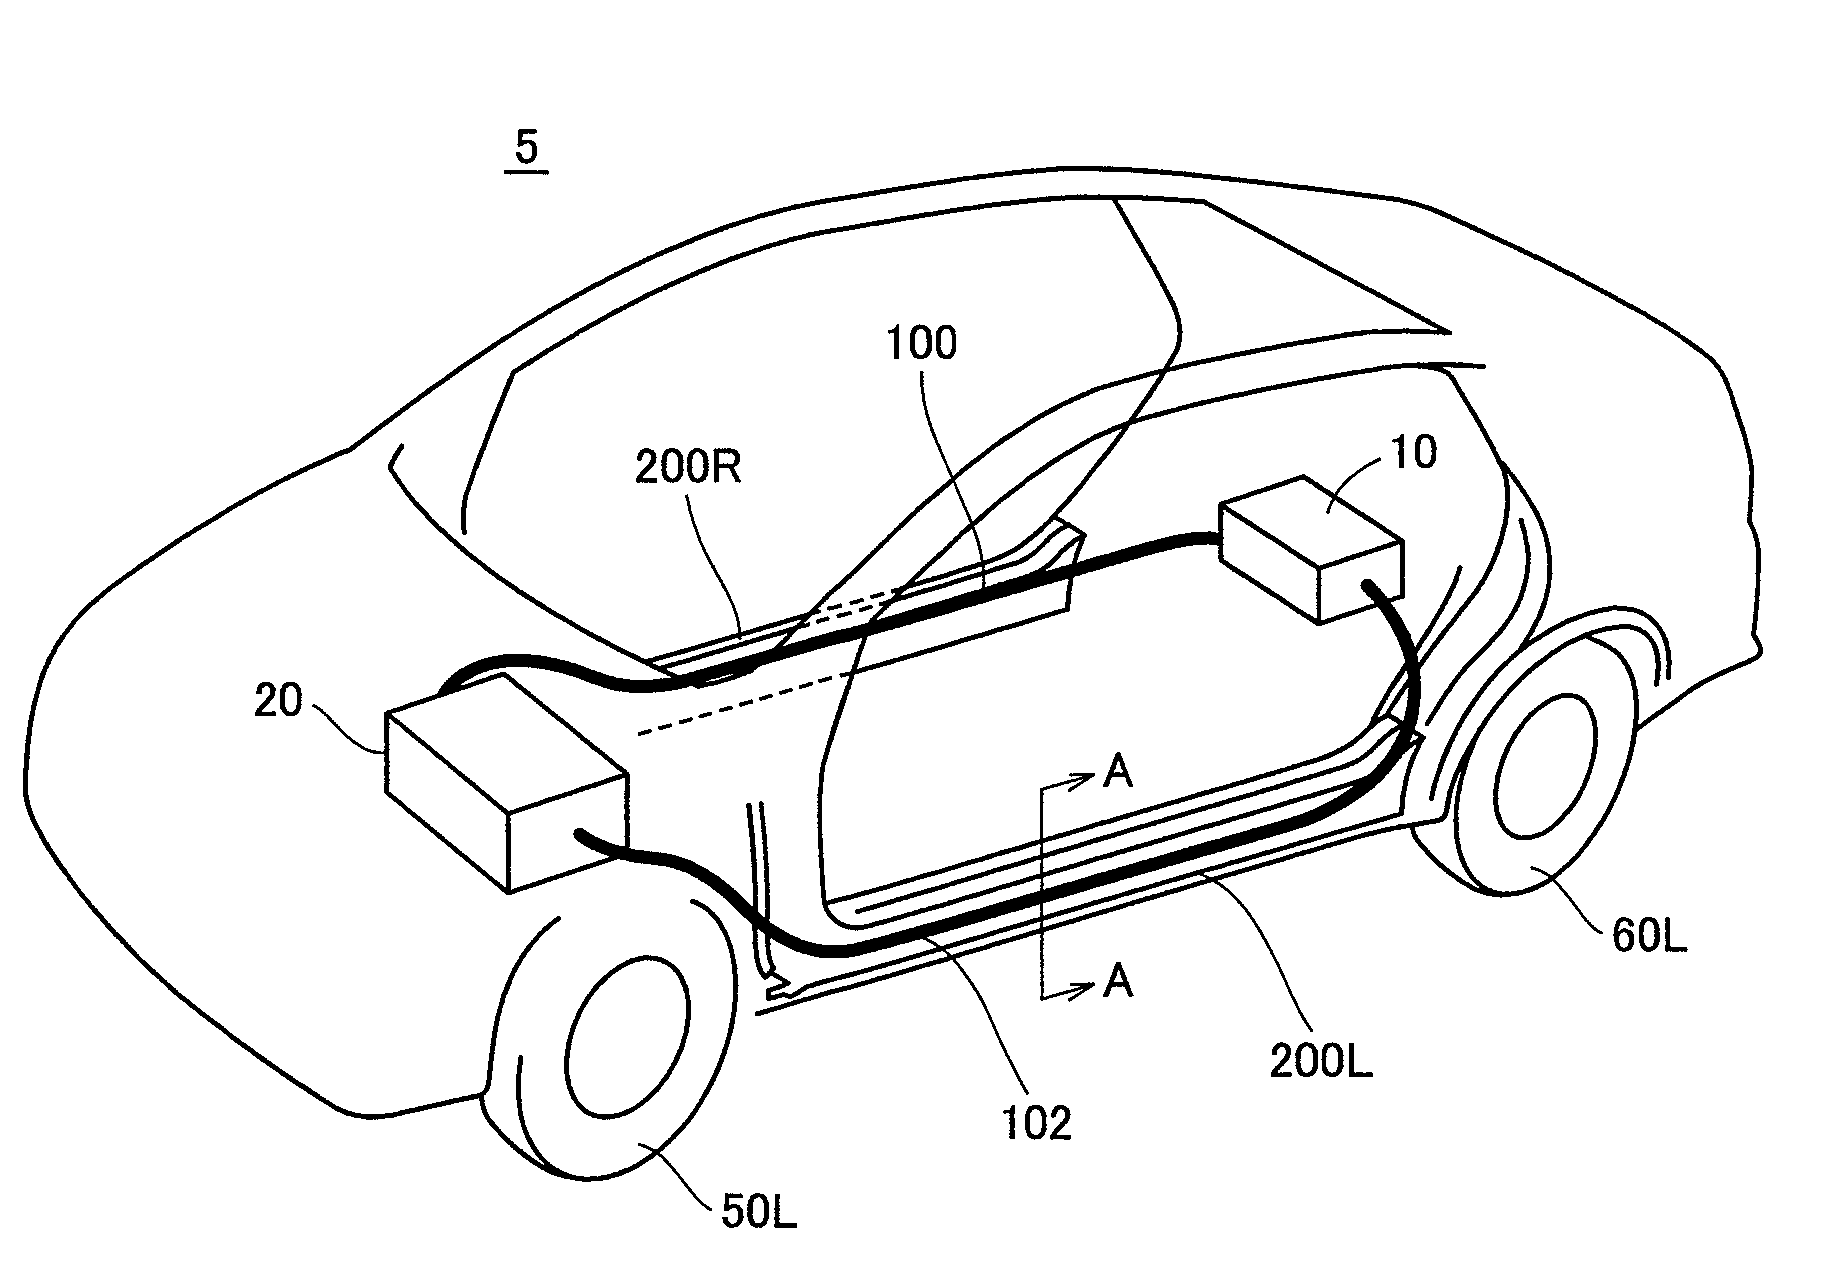 Load driving device including first and second electric power lines between power supply and electric power conversion device